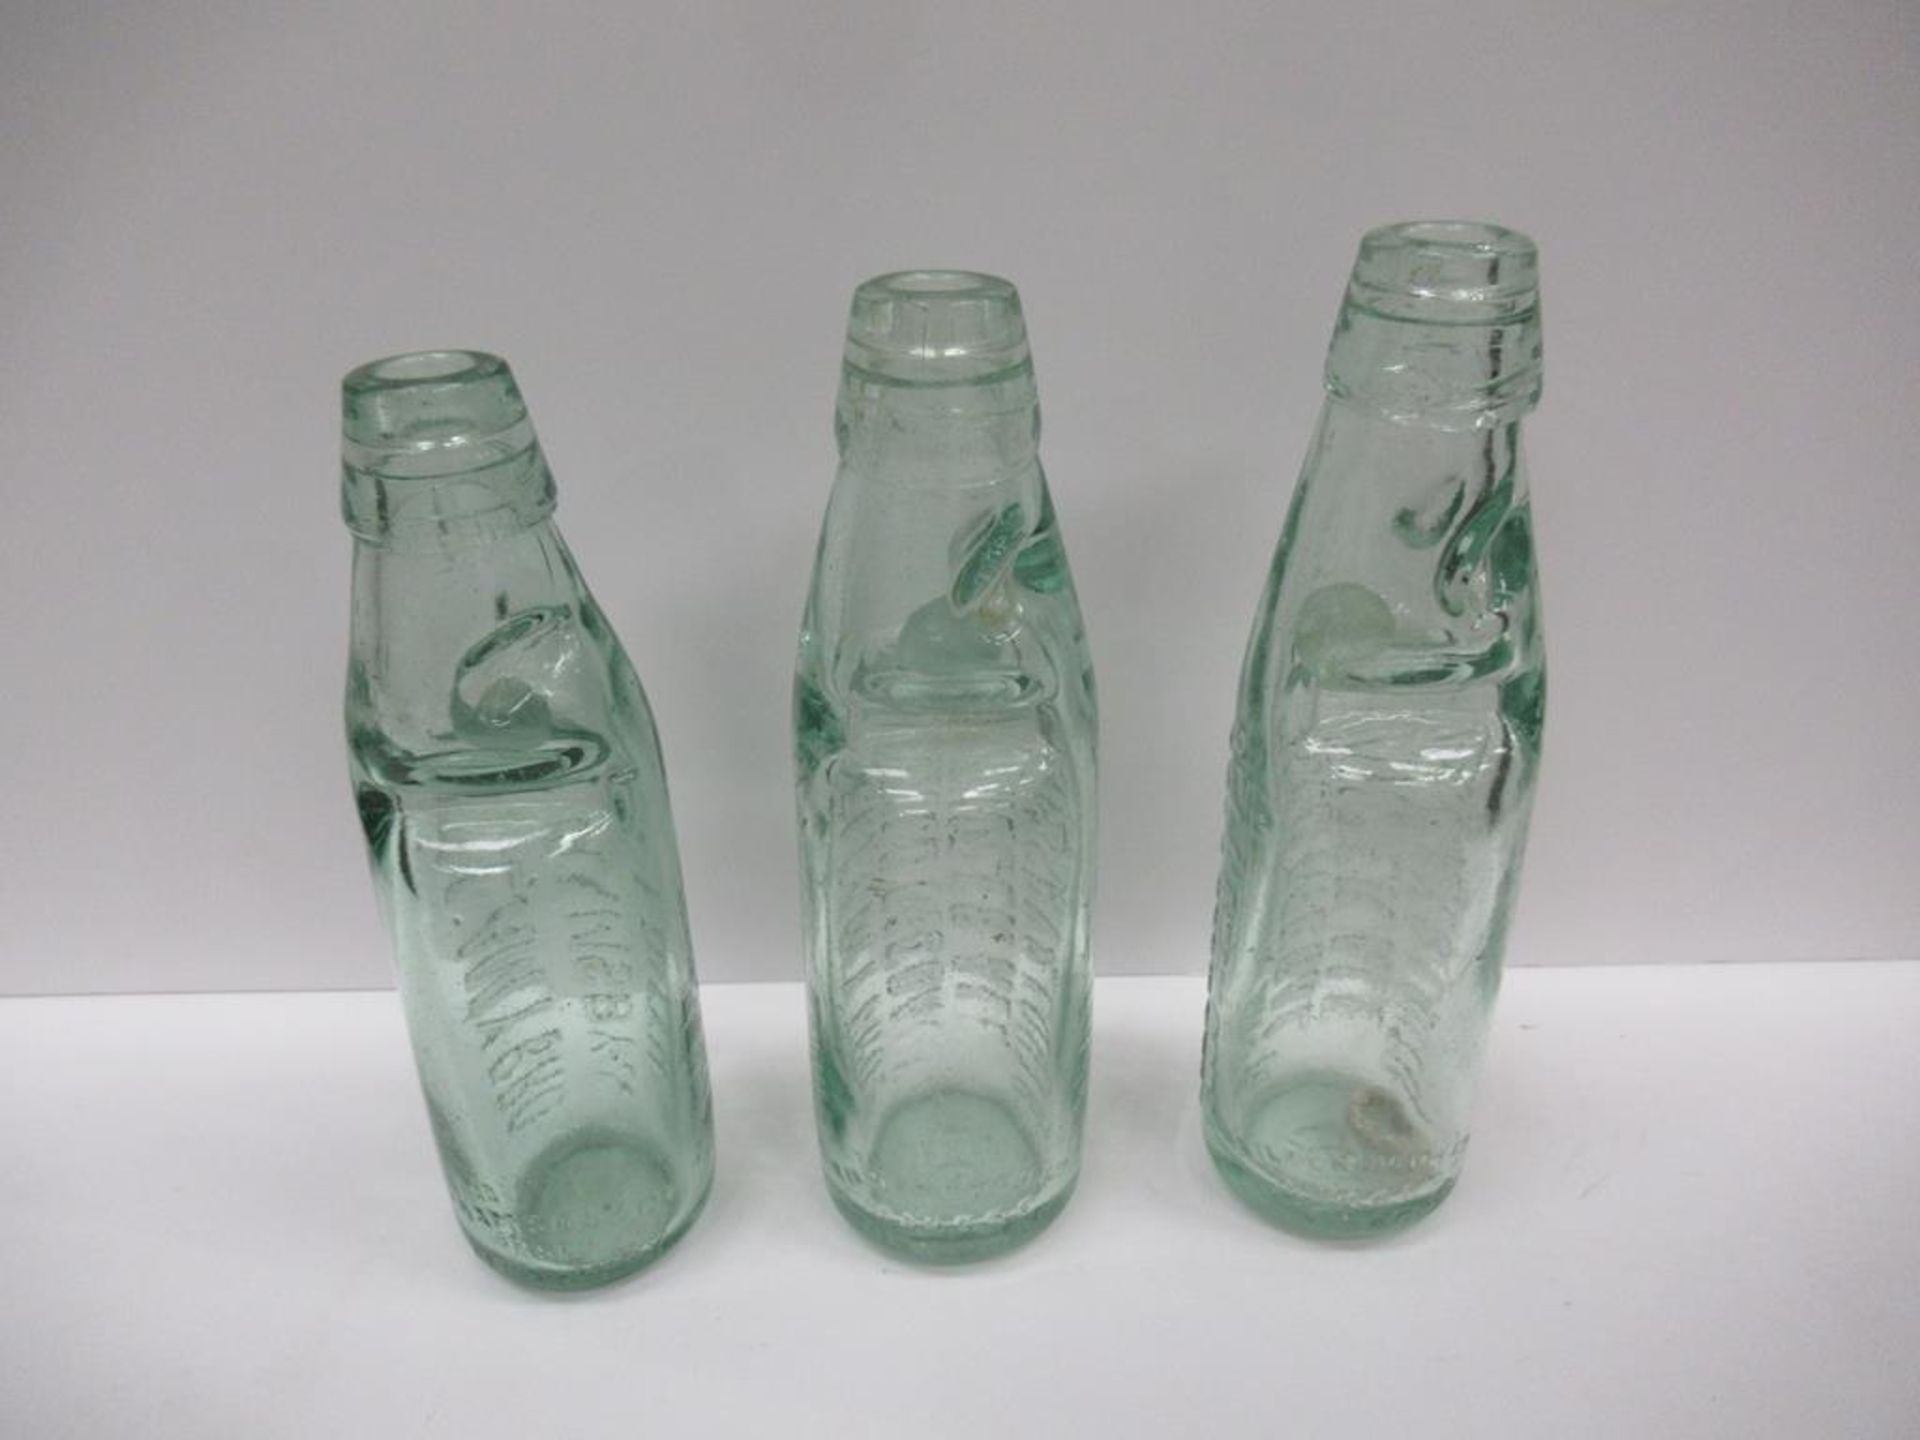 7x Grimsby (3x Grimsby & Louth) Bellamy Bro's Codd bottles - Image 16 of 23